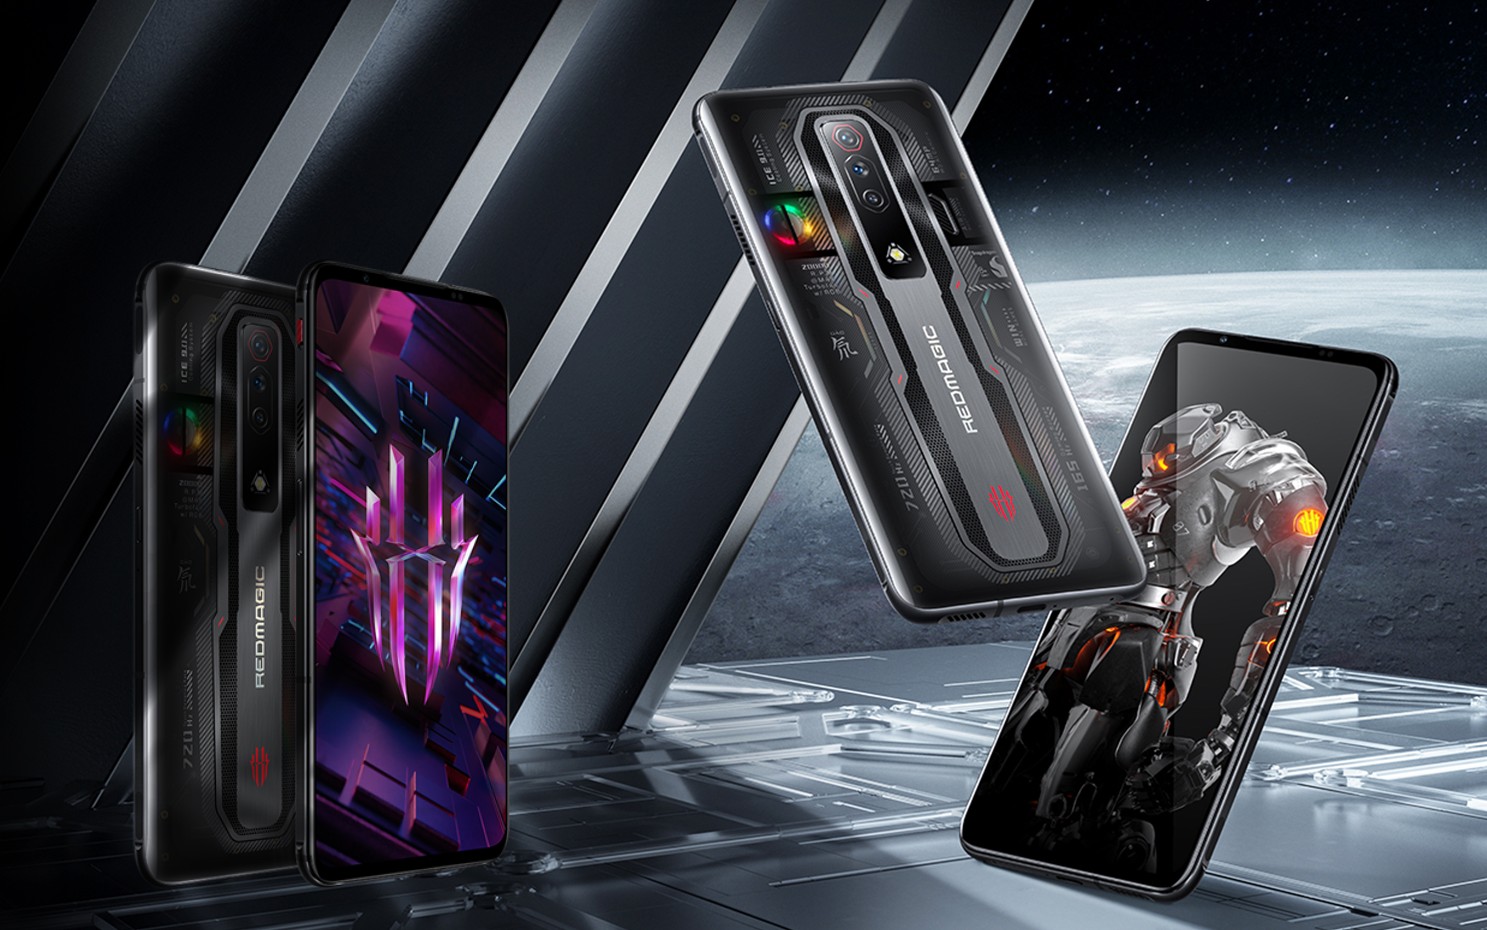 Redmagic burst onto the scene with a reasonable mission: to make cell phones explicitly intended for gamers.